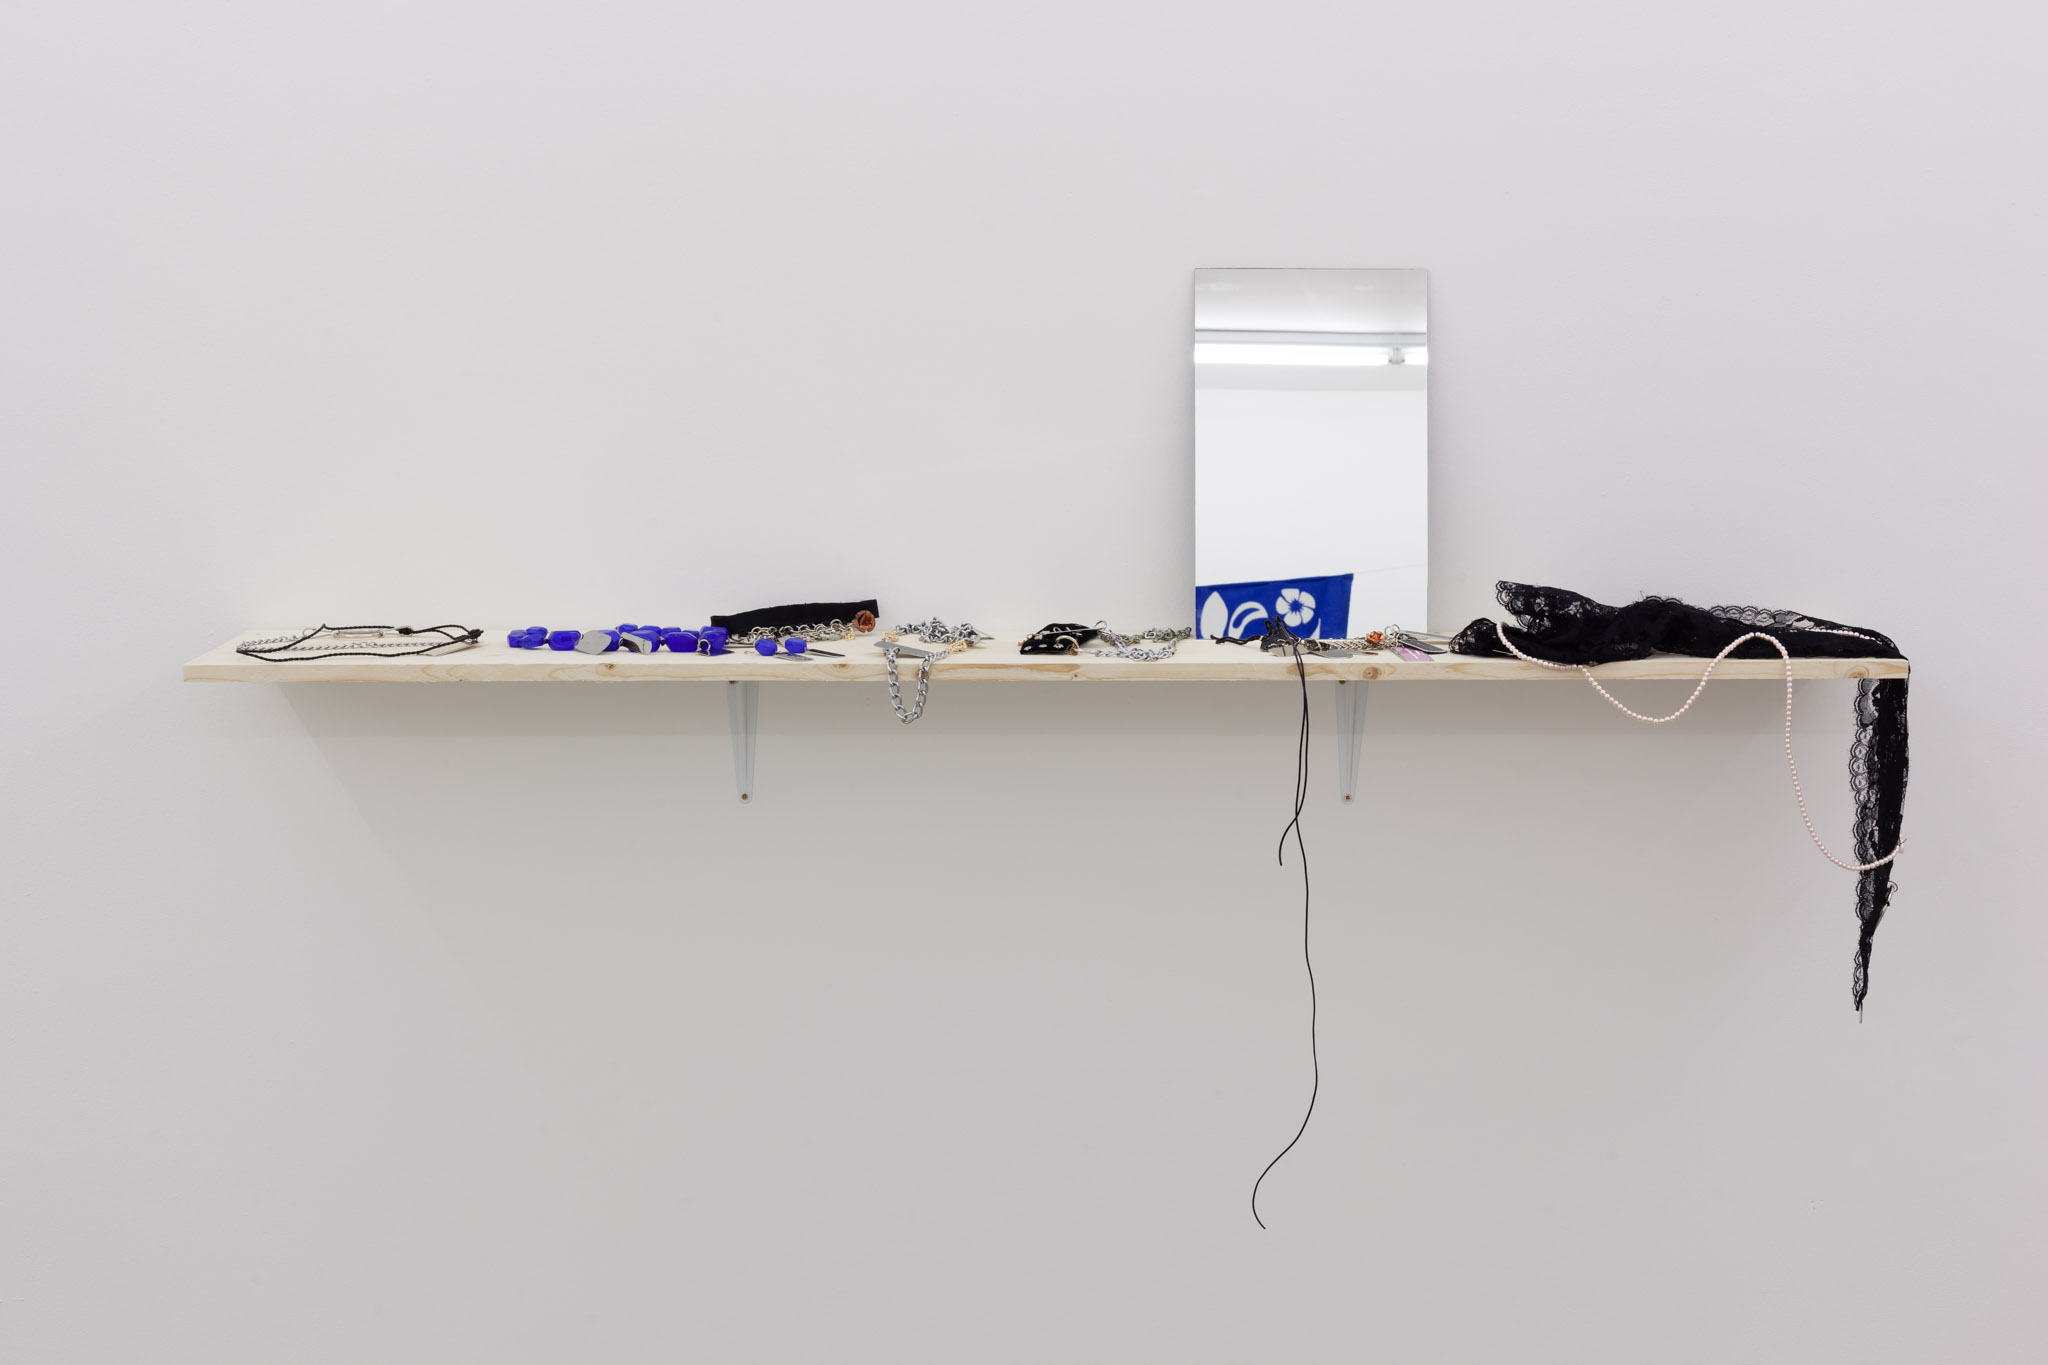 Single Moms presented by House of Gaga, Vilma Gold, London, 2014, installation view. House of Gaga presents Single Moms